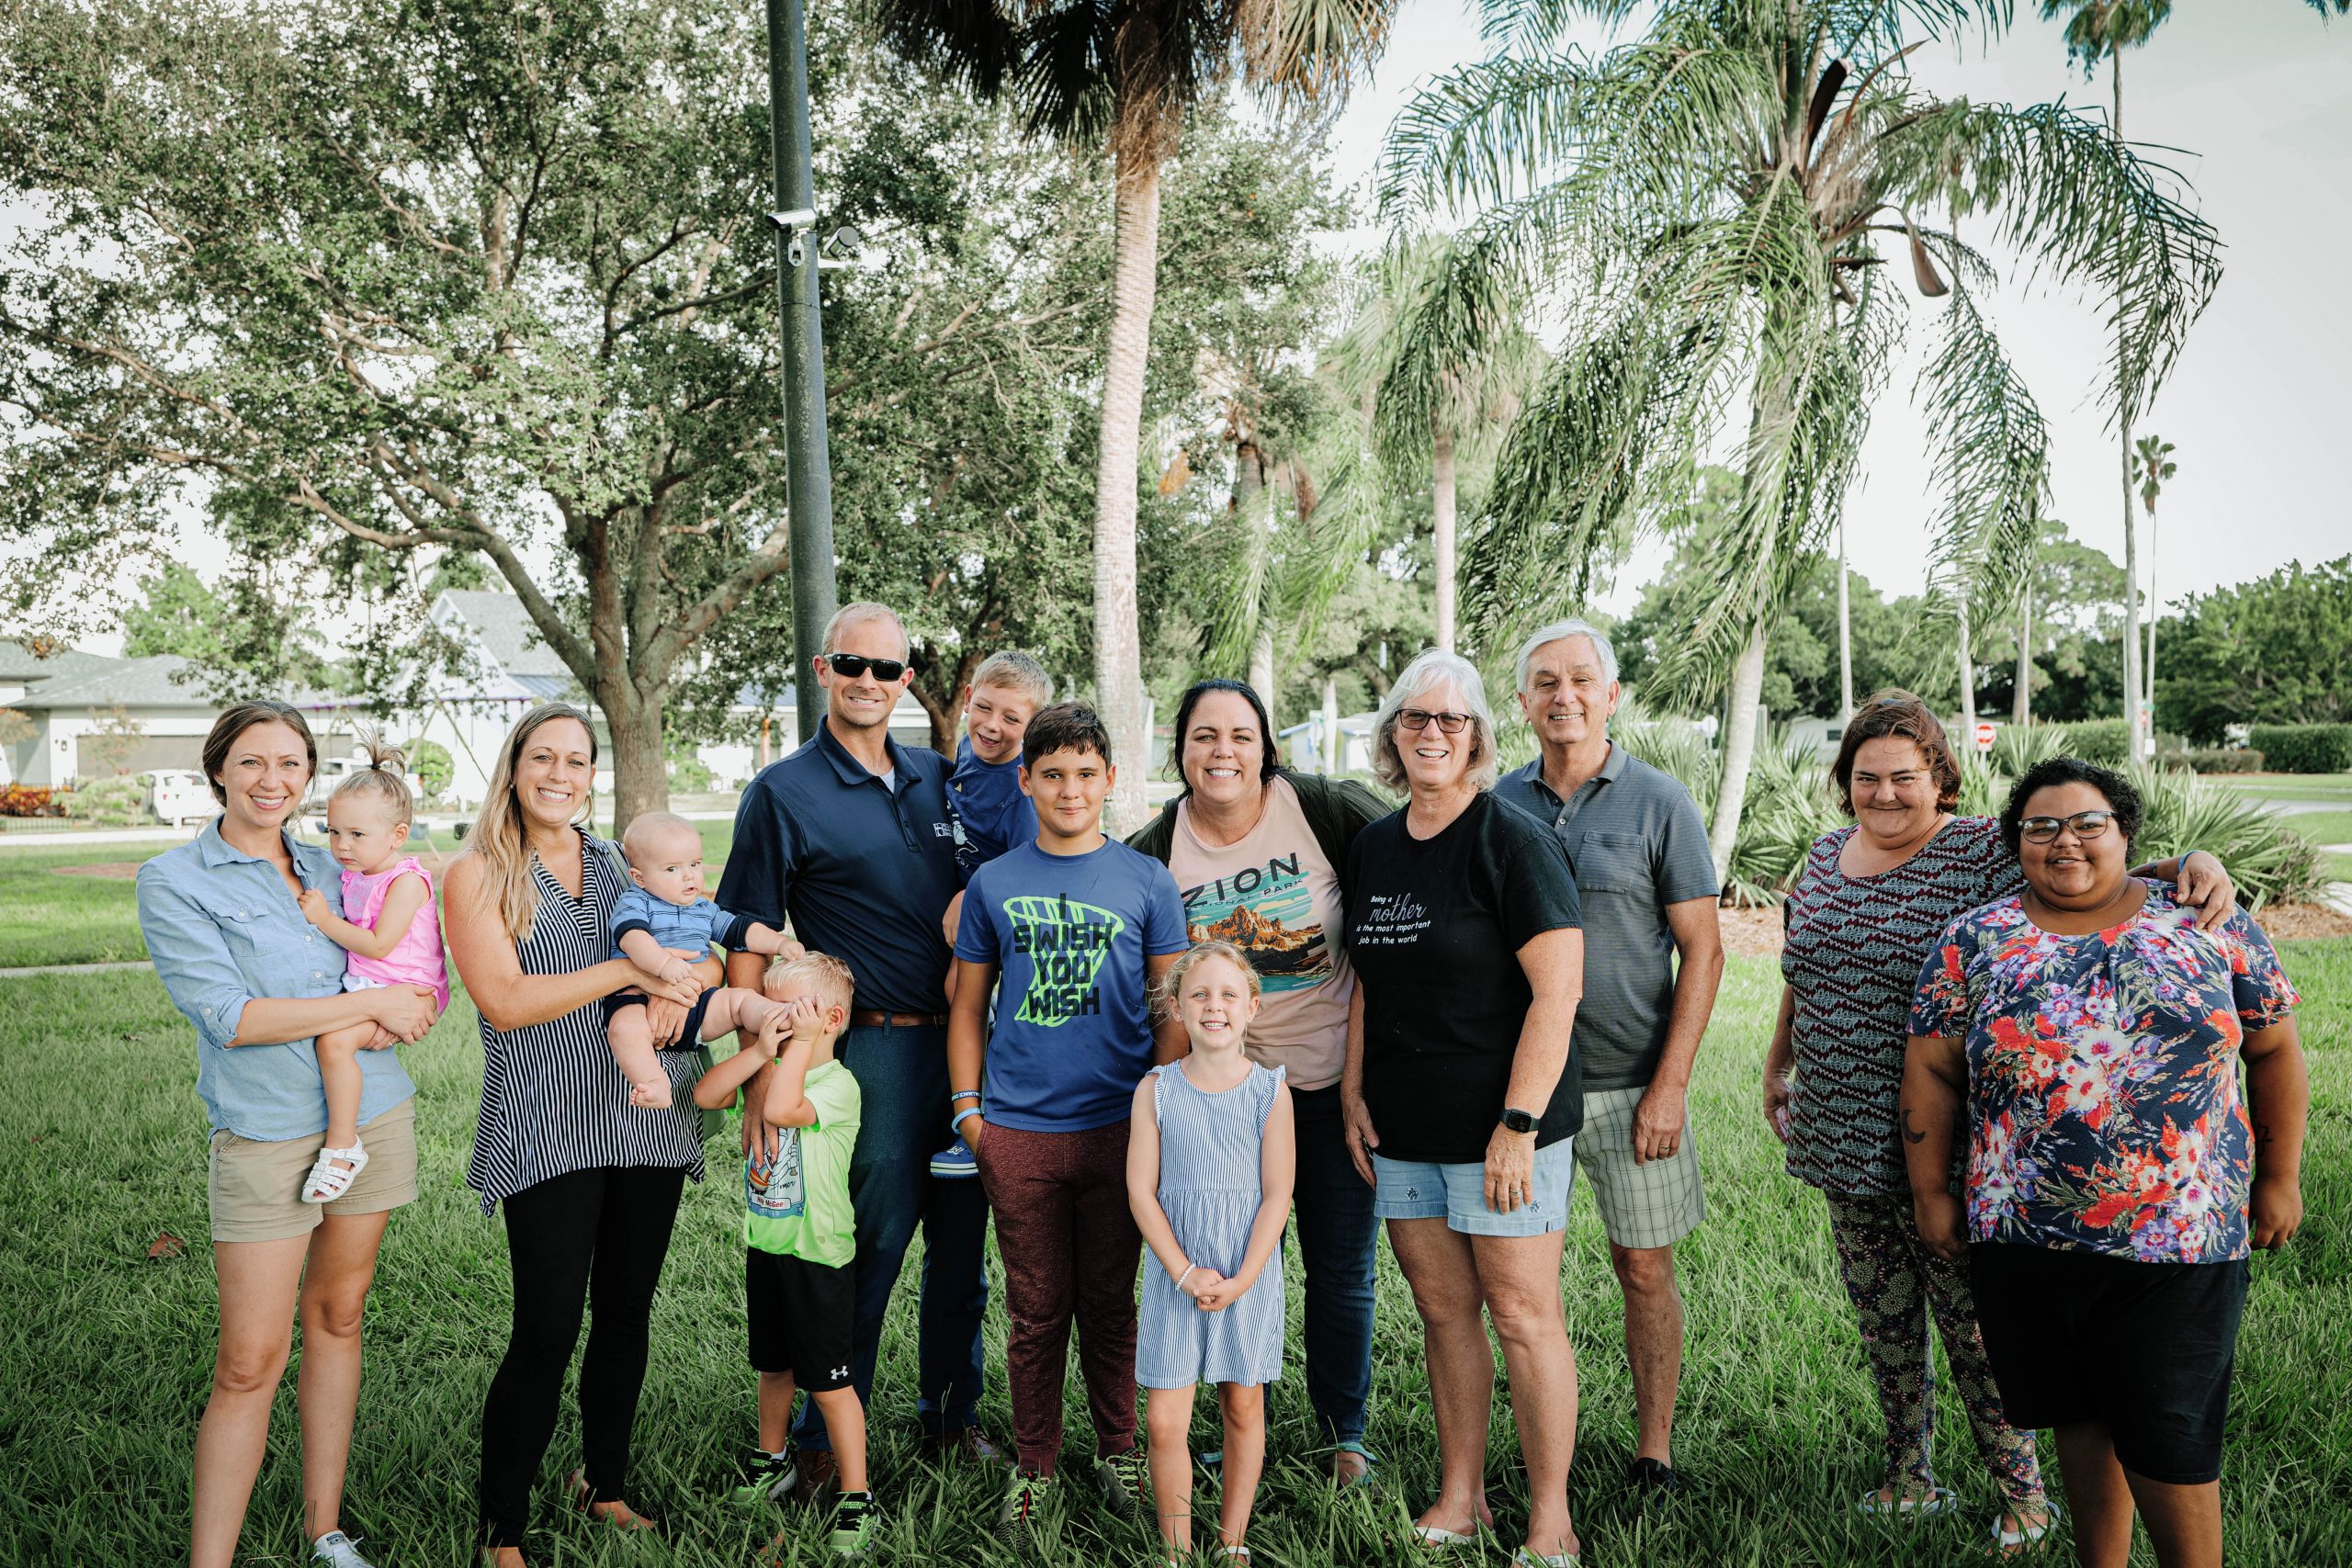 14 people gather for a group photo on a span of green grass surrounded by palm trees